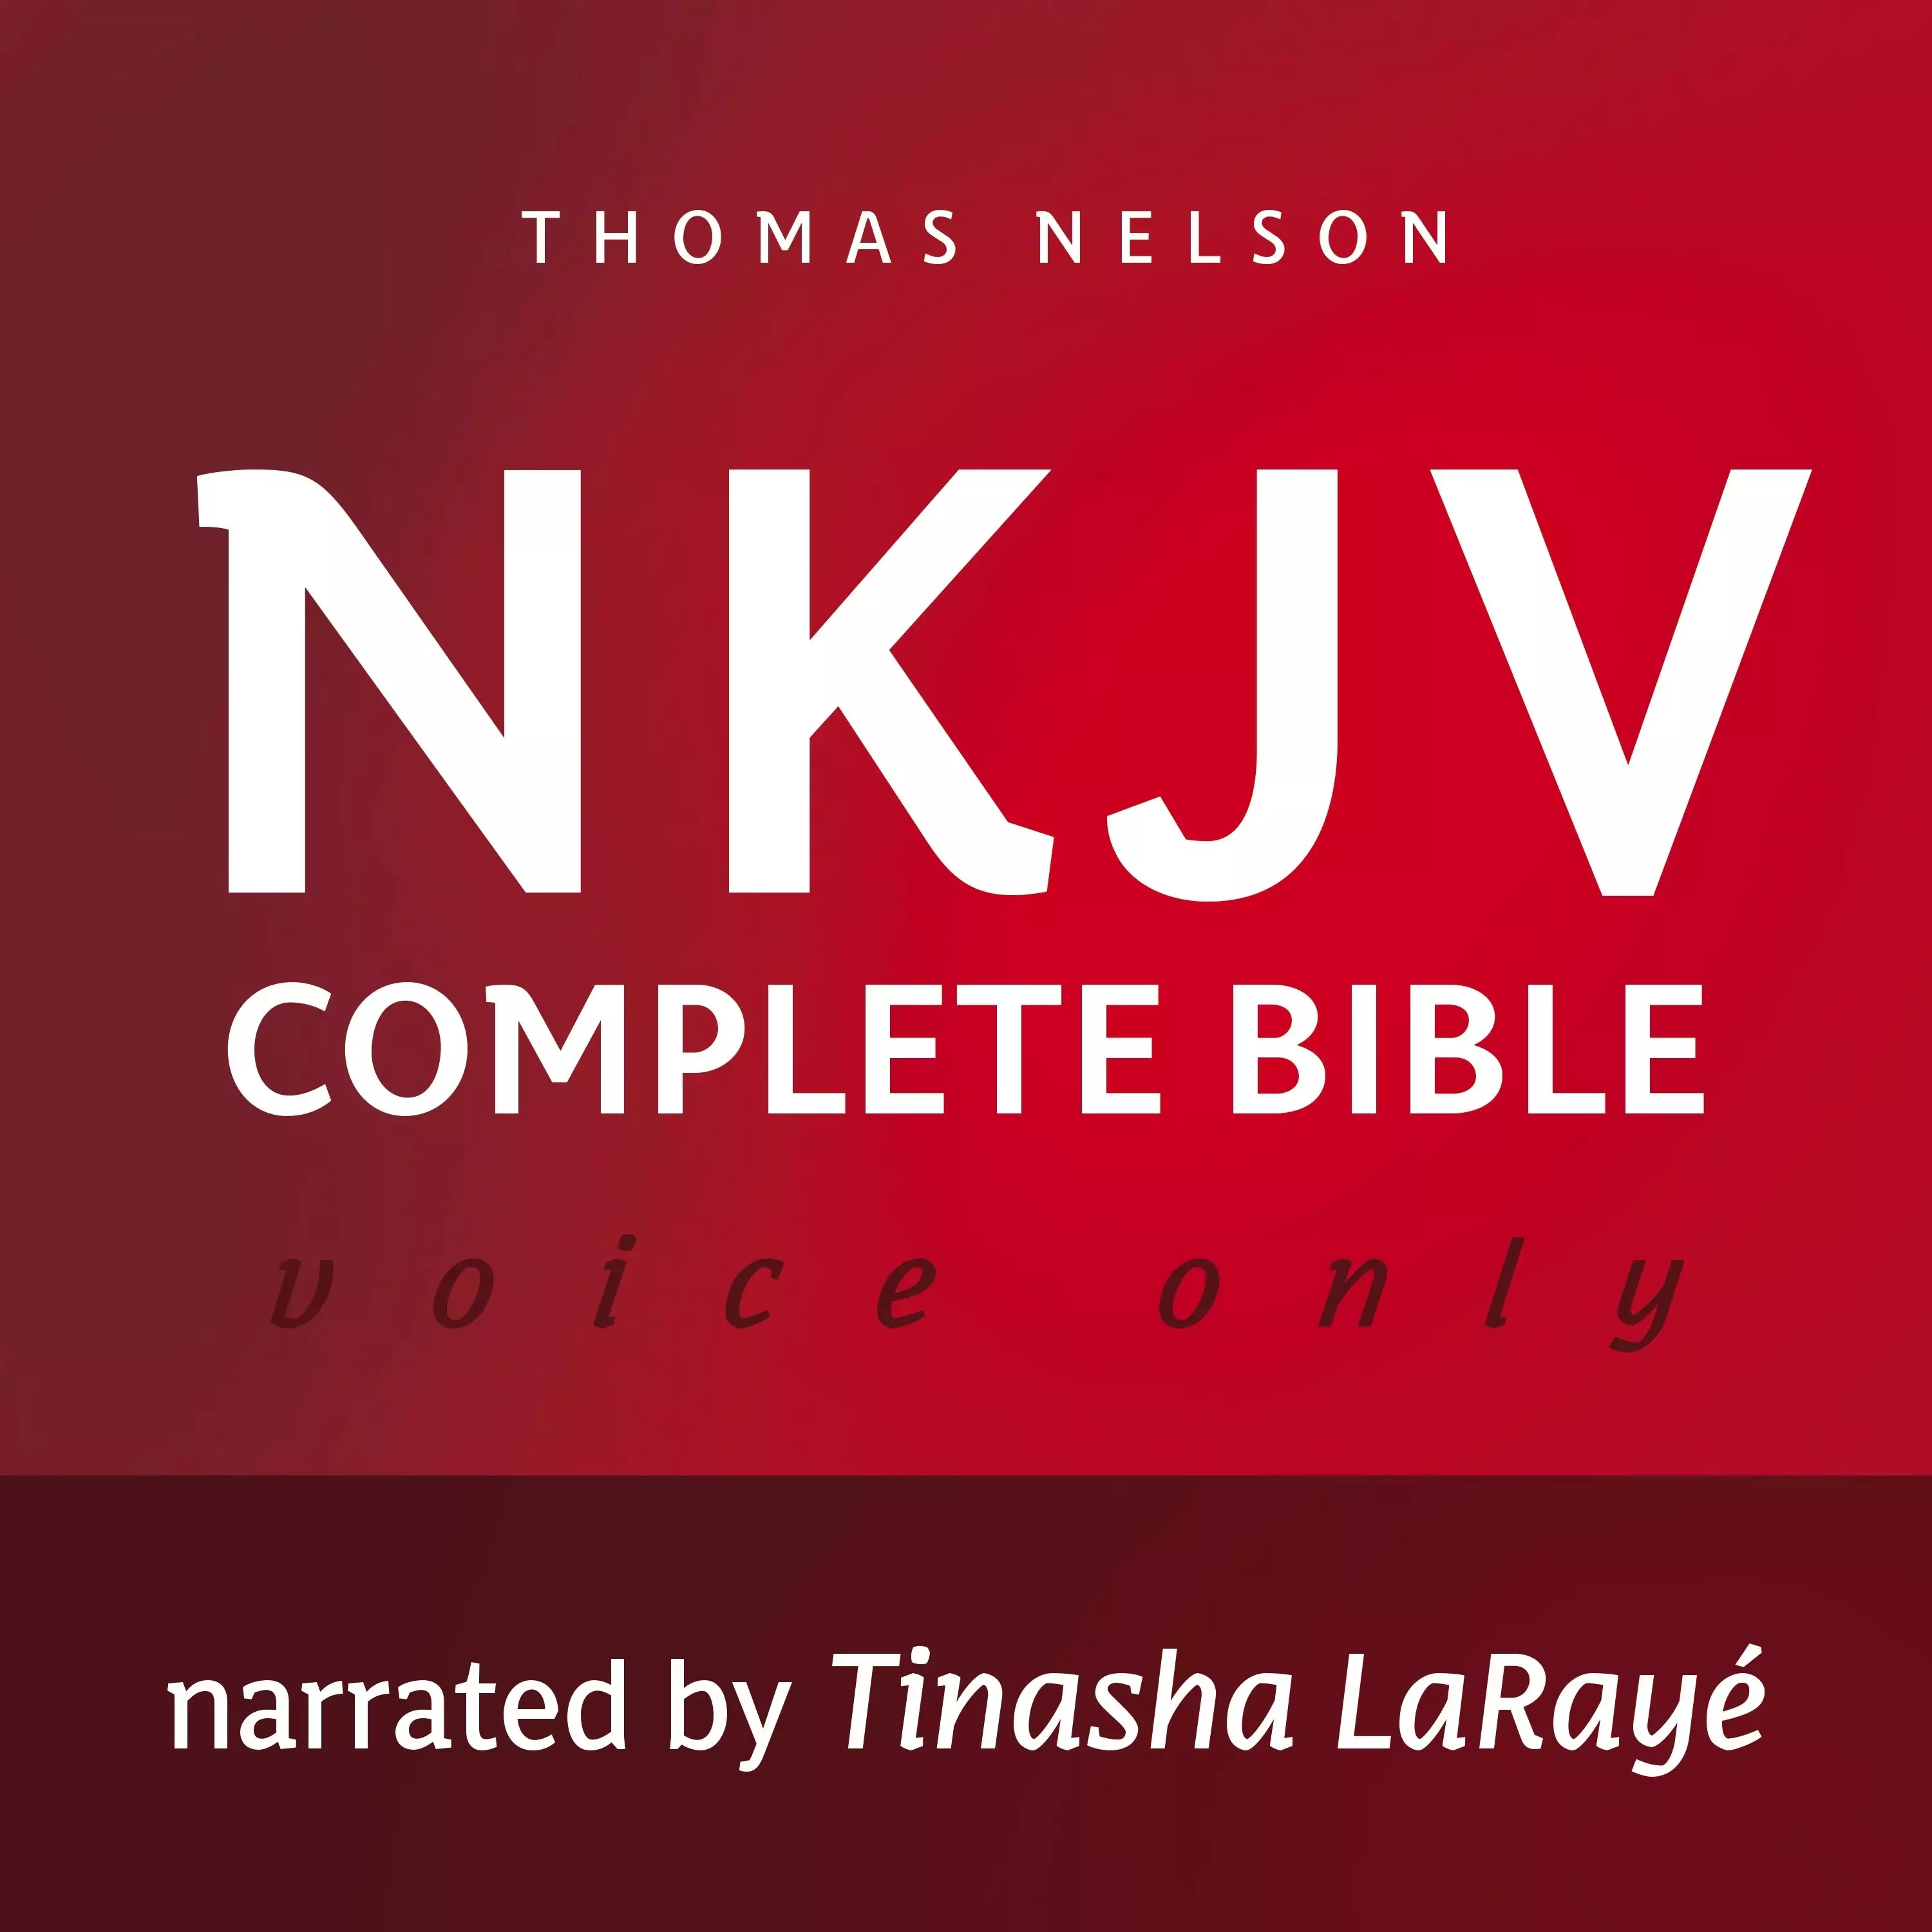 Voice Only Audio Bible - New King James Version, NKJV (Narrated by Tinasha LaRayé): Complete Bible